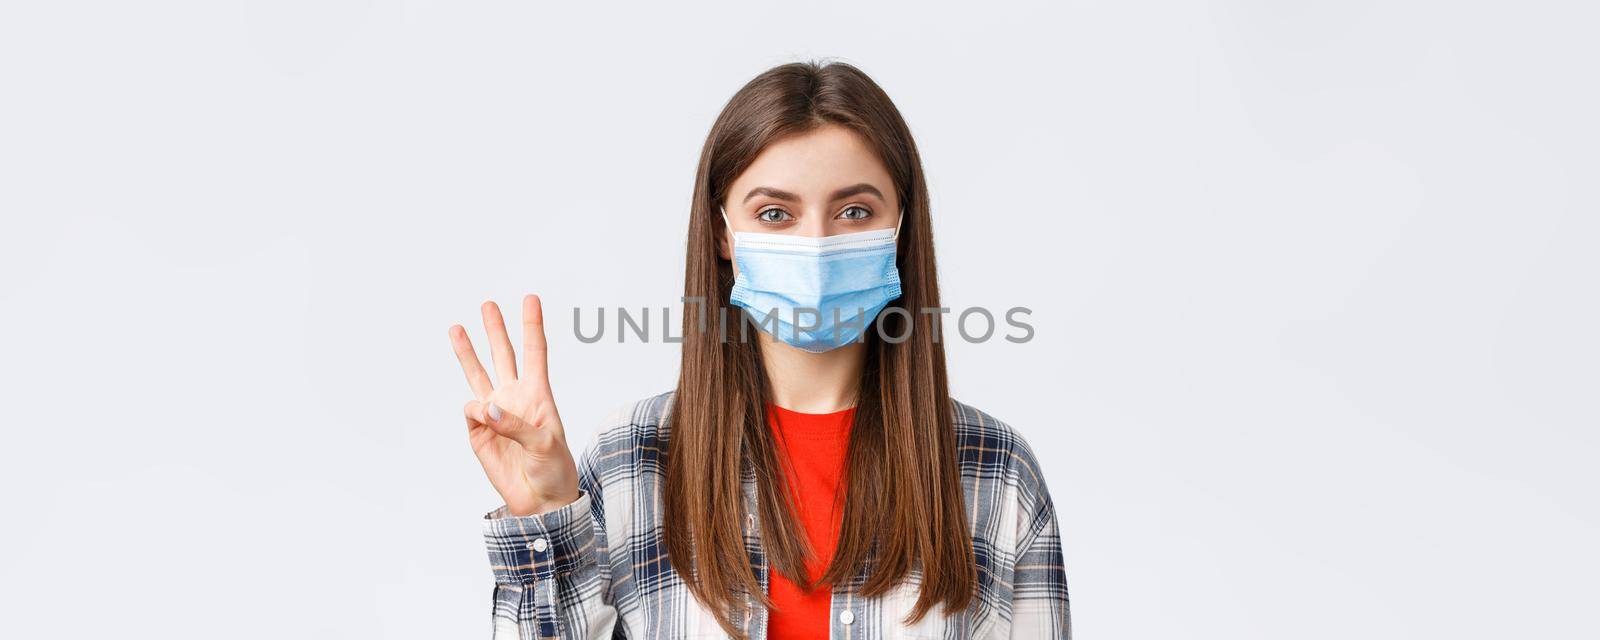 Coronavirus outbreak, leisure on quarantine, social distancing and emotions concept. Close-up of cheerful attractive woman in medical mask show number three, third, white background.